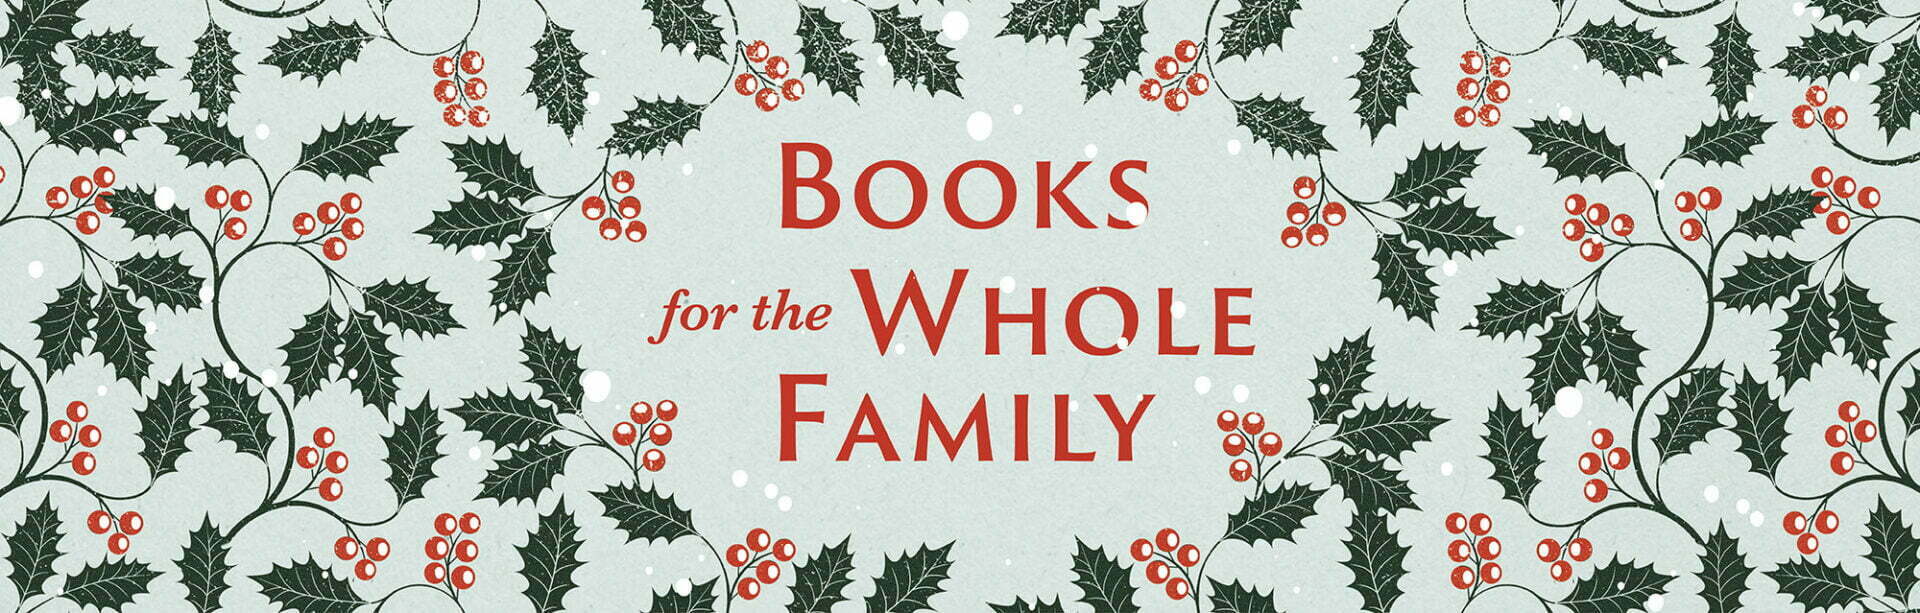 https://faber.wp.dev.diffusion.digital/wp-content/uploads/2021/11/Faber-Christmas-Gift-Guide-family-books-1920x613.jpg